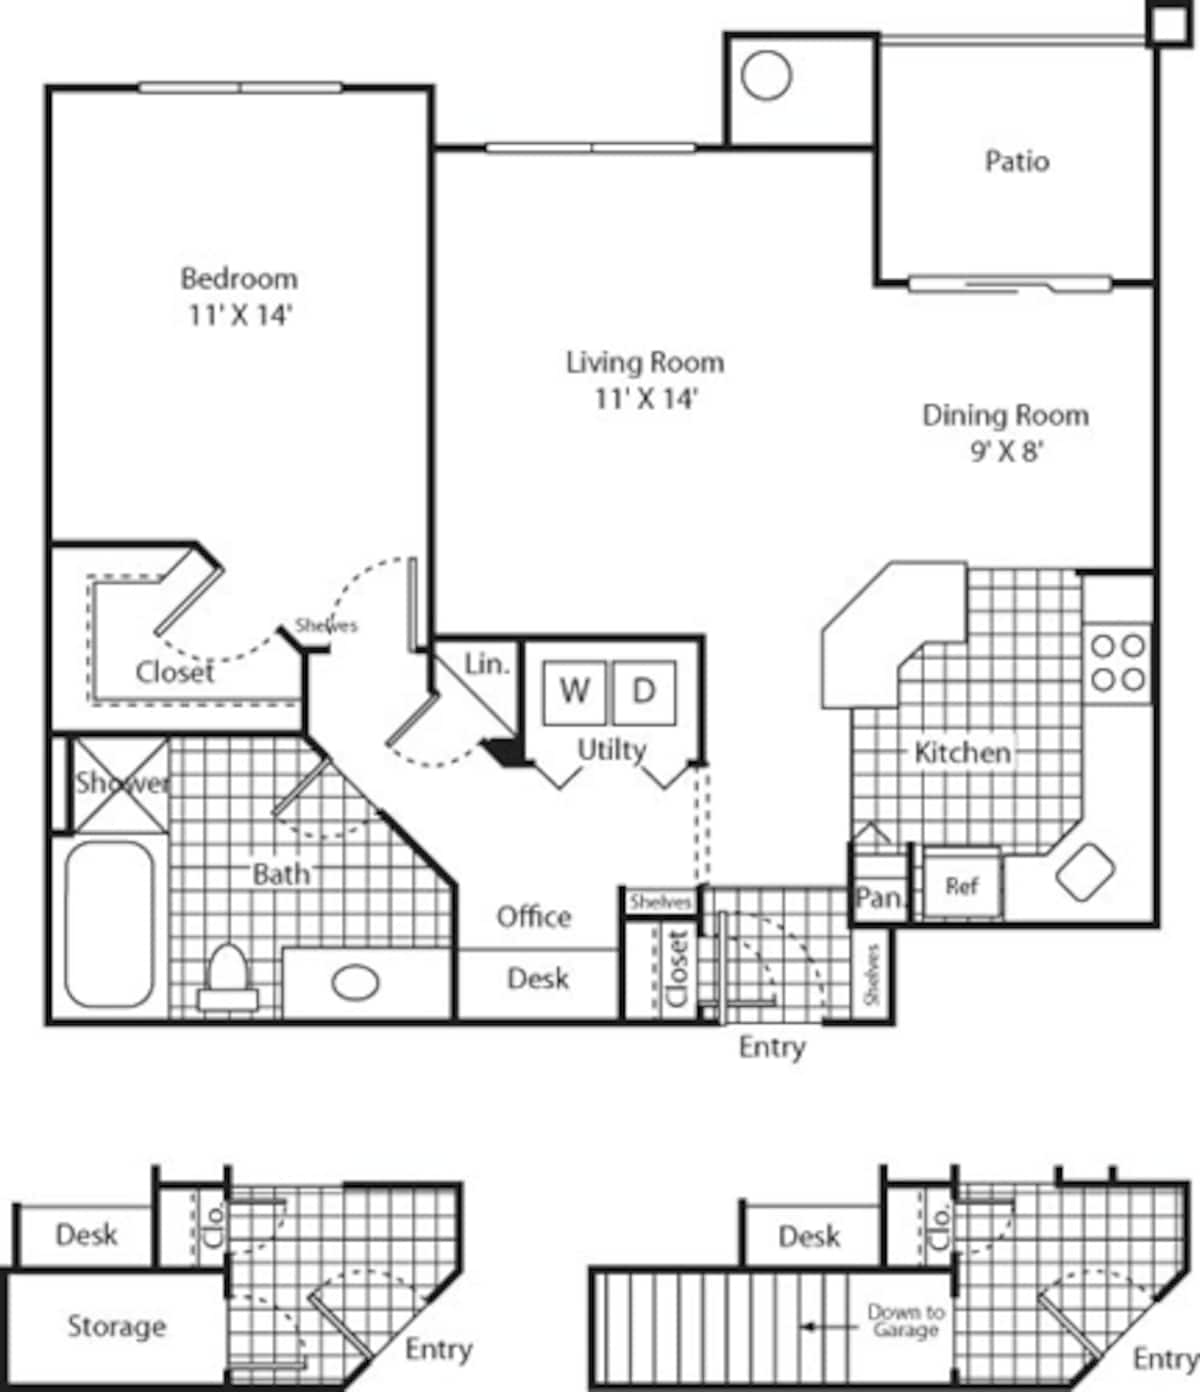 Floorplan diagram for One Bed A-3 - Phase I, showing 1 bedroom